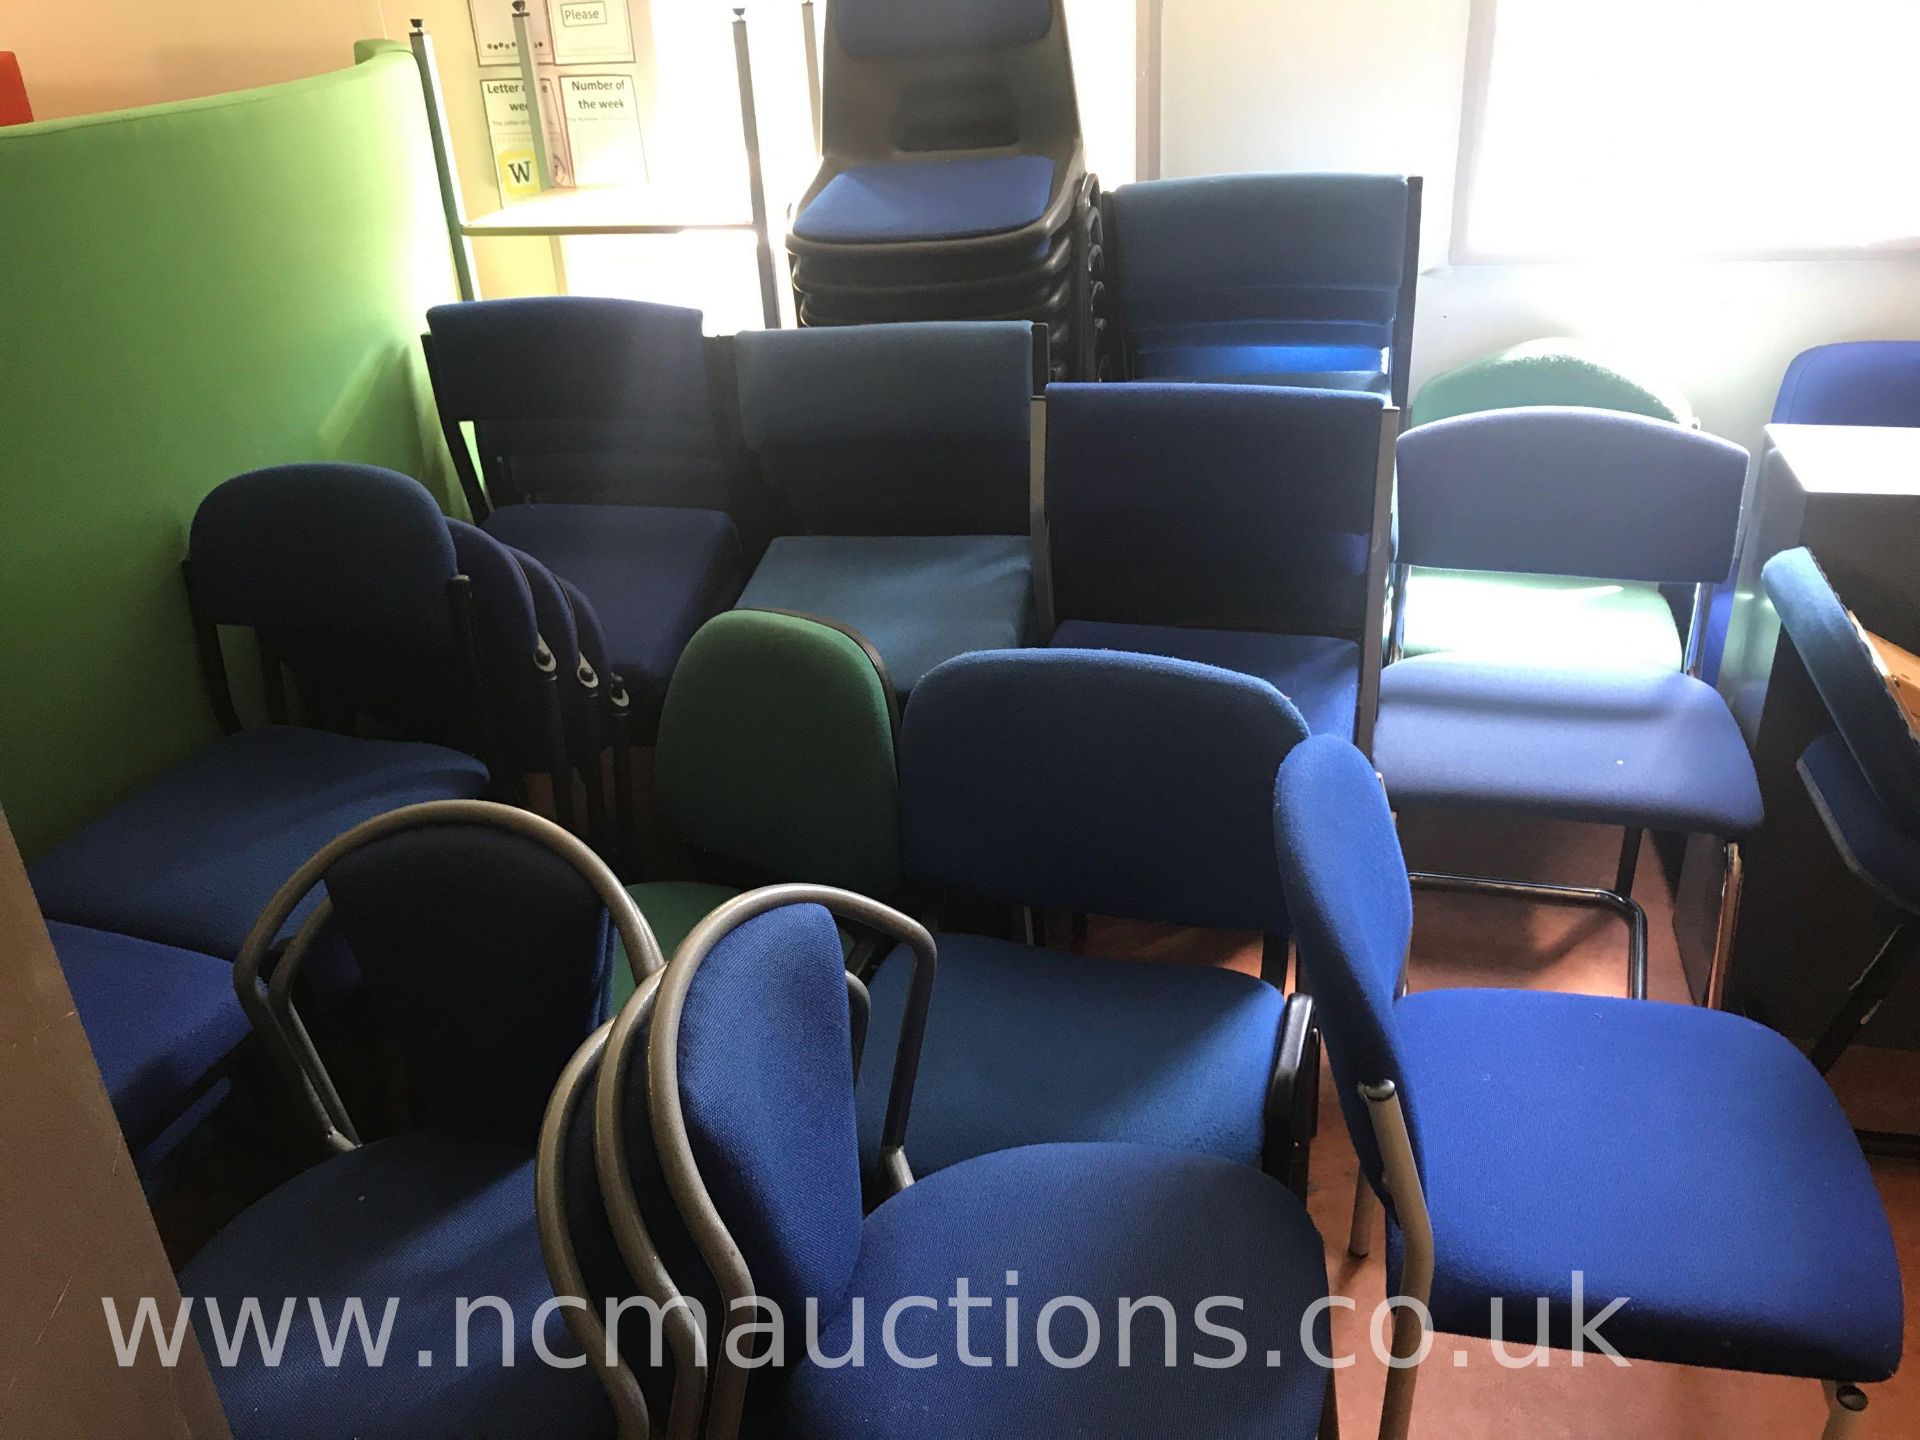 Mixture Of Office Chairs - Image 2 of 3